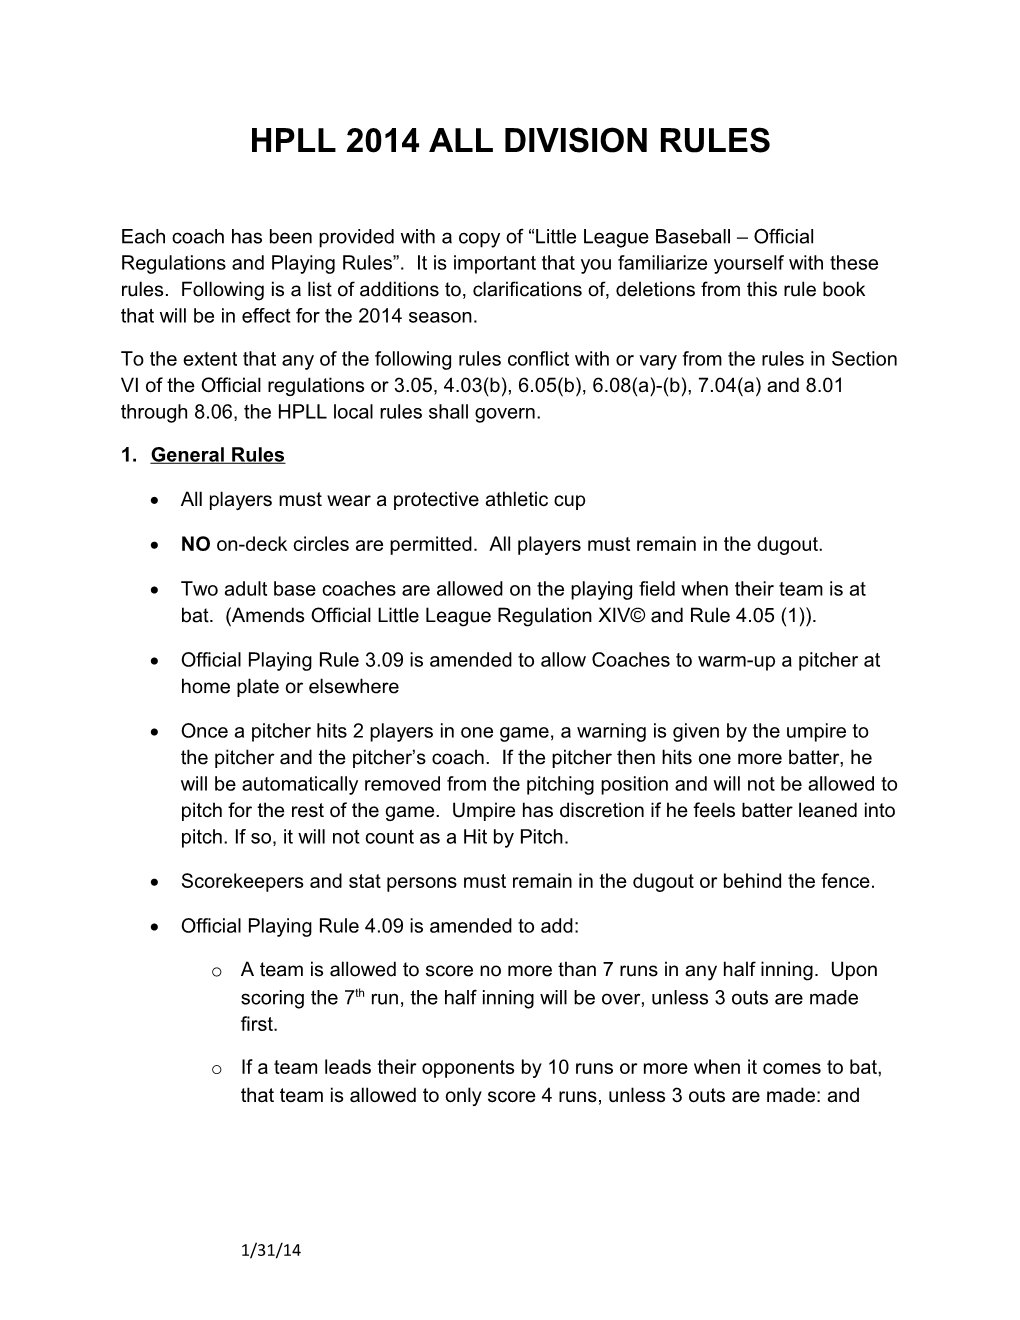 Hpll 2014All Division Rules